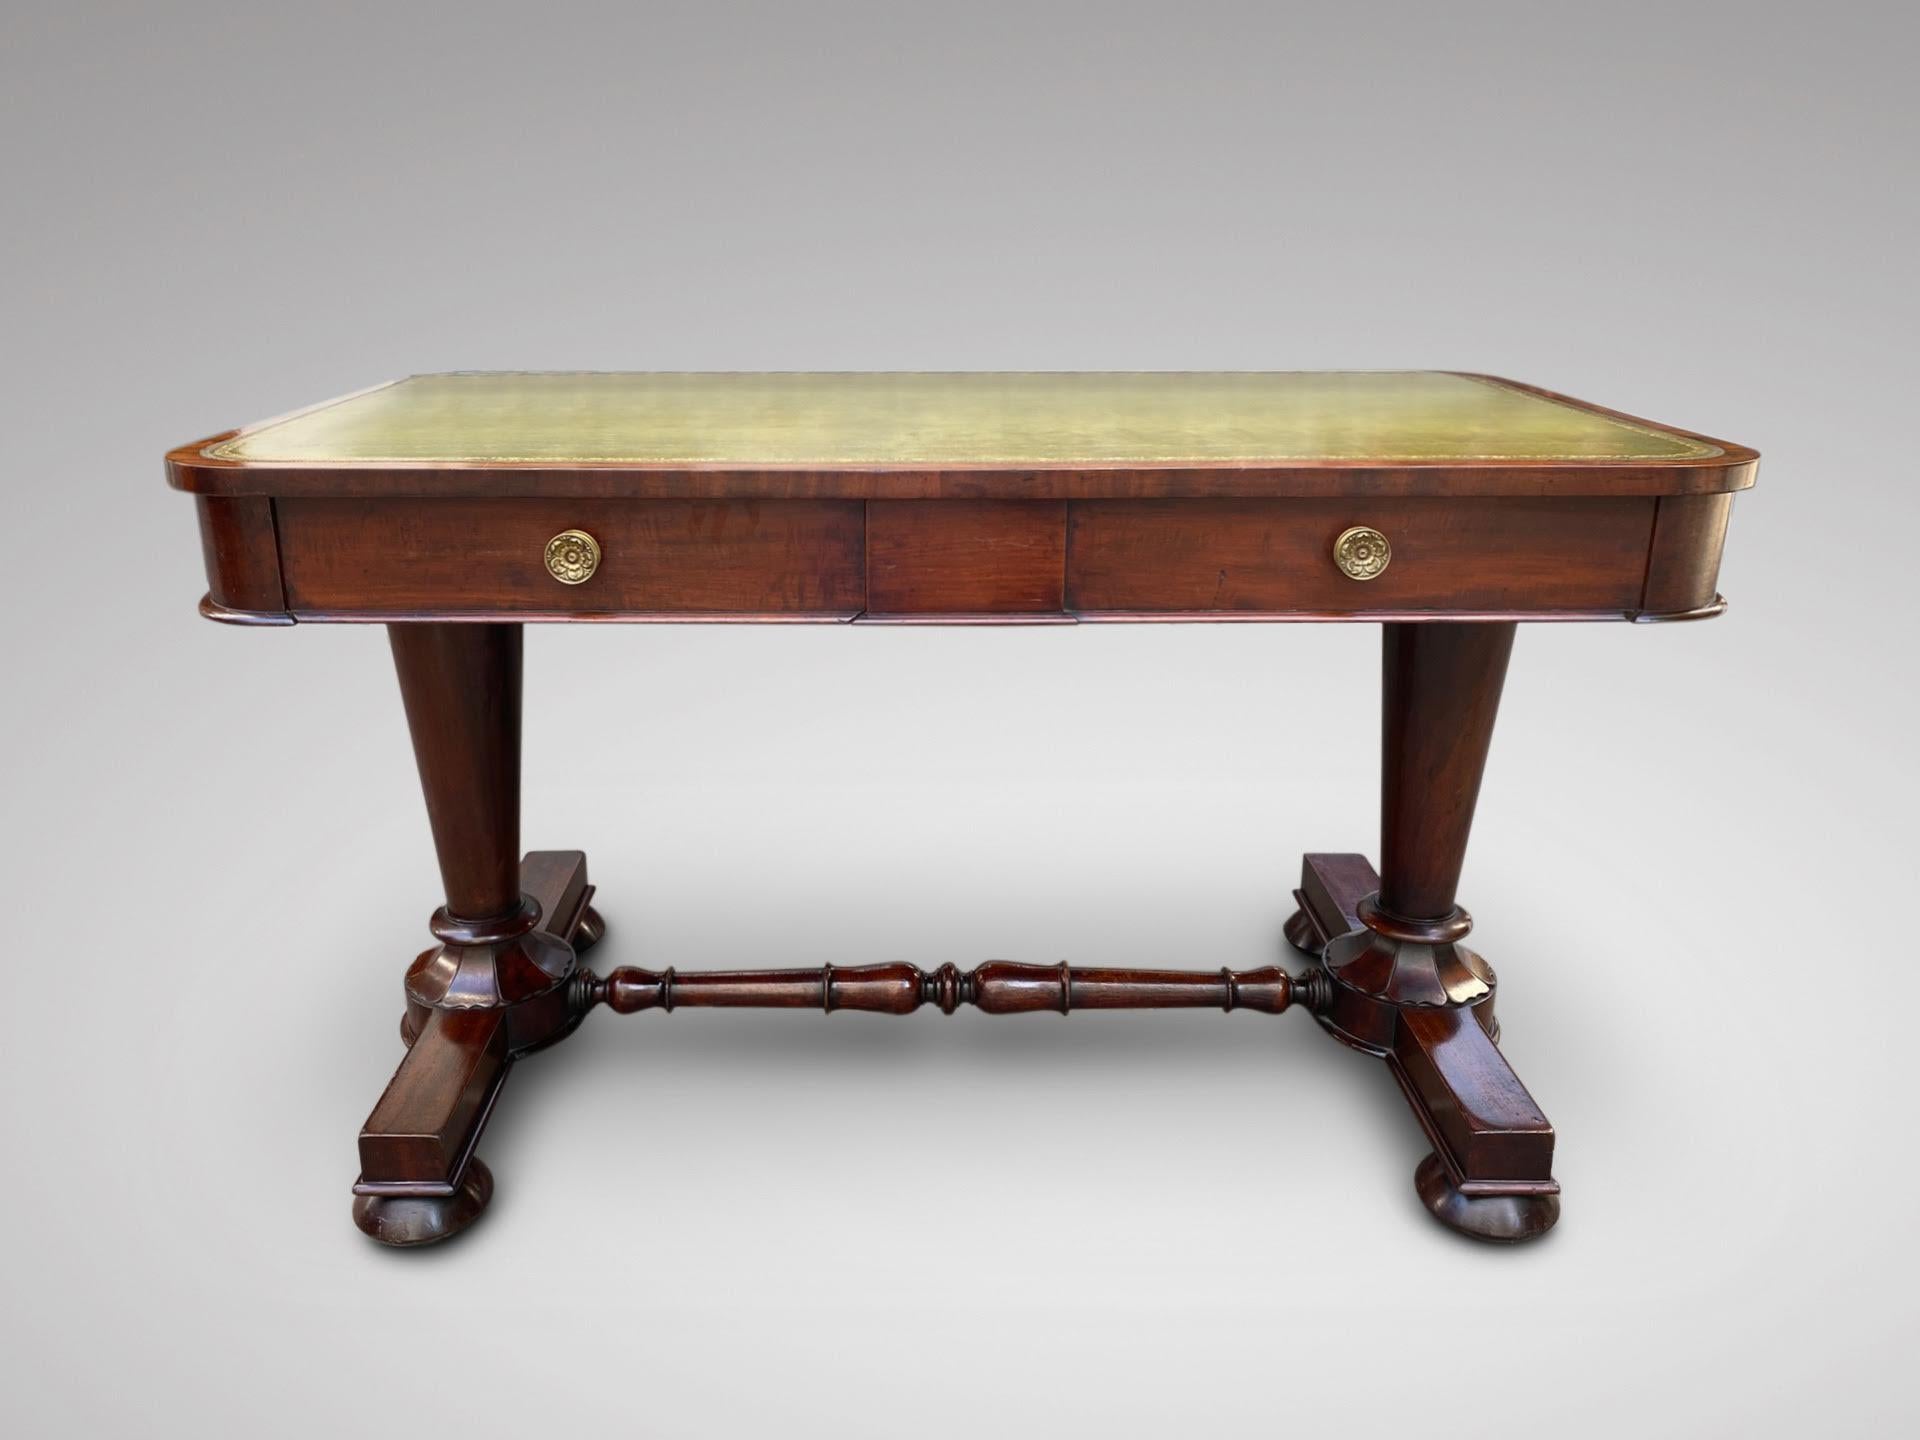 Polished Early 19th Century William IV Period Mahogany Library Writing Table For Sale